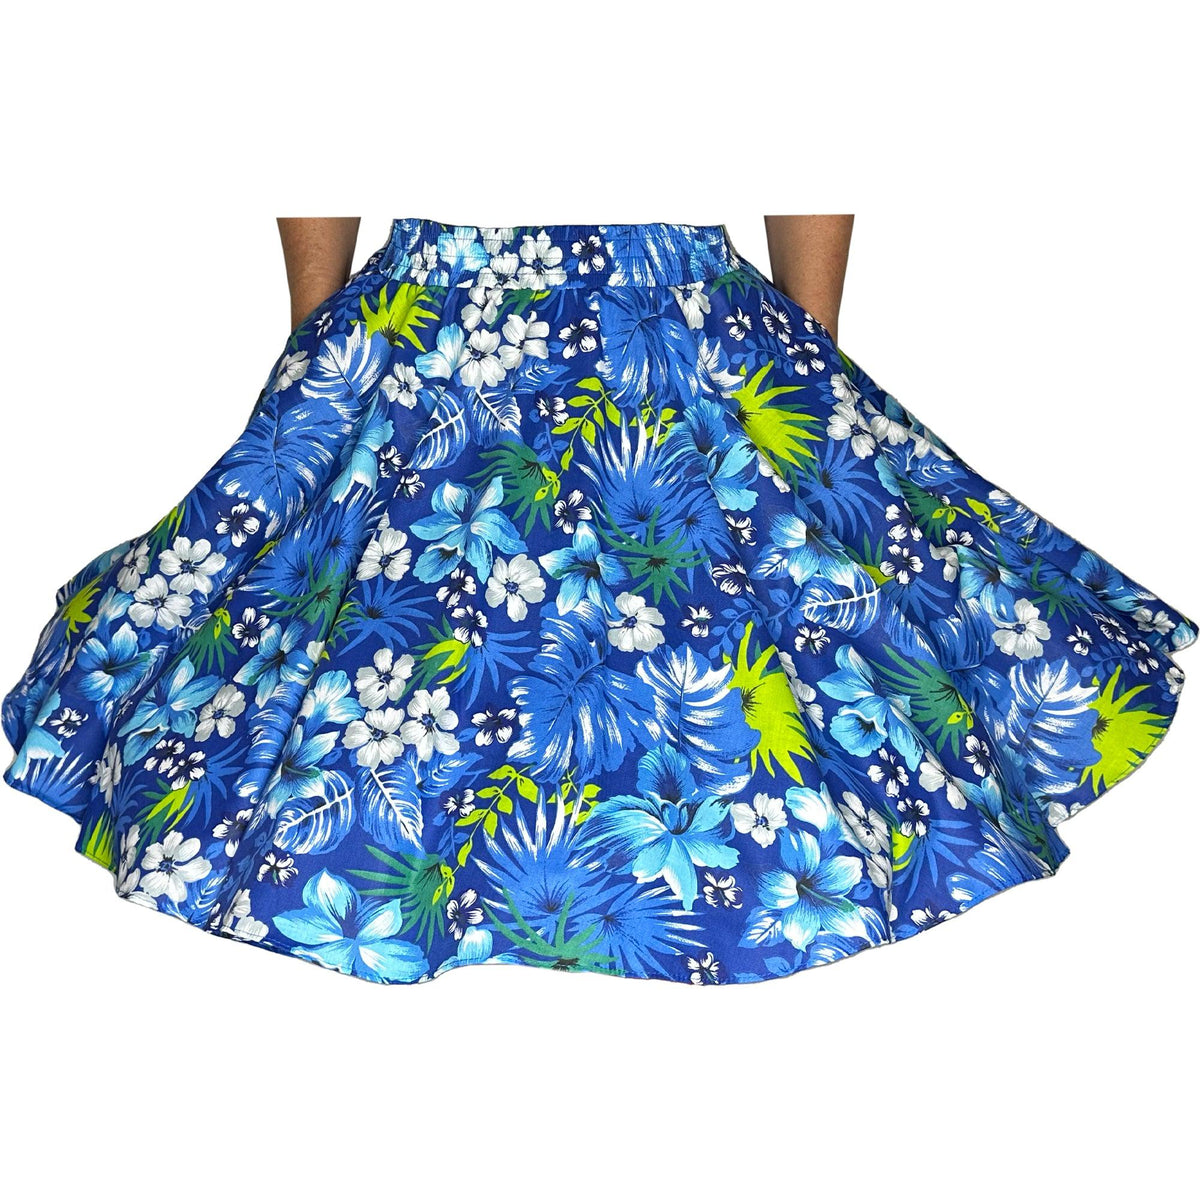 A woman wearing a Tropical Hawaiian Square Dance Skirt adorned with hibiscus flowers and palm leaves made by Square Up Fashions.